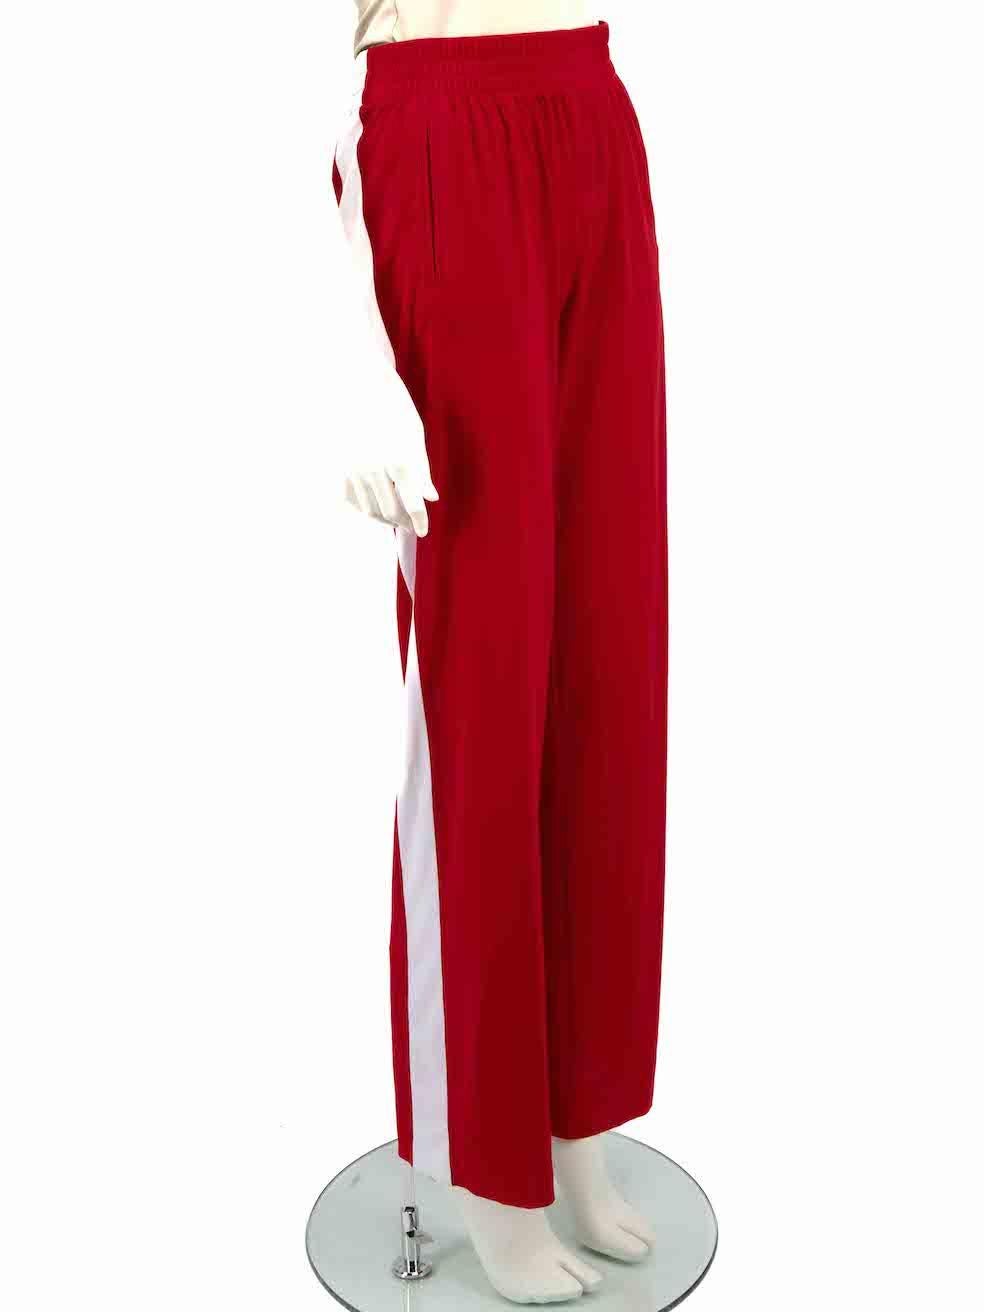 CONDITION is Very good. Minimal wear to trousers is evident. Minimal wear to both cuffs with heat creasing on this used Norma Kamali designer resale item.
 
 Details
 Red
 Polyester
 Straight leg trousers
 Mid rise
 White striped accent on sides
